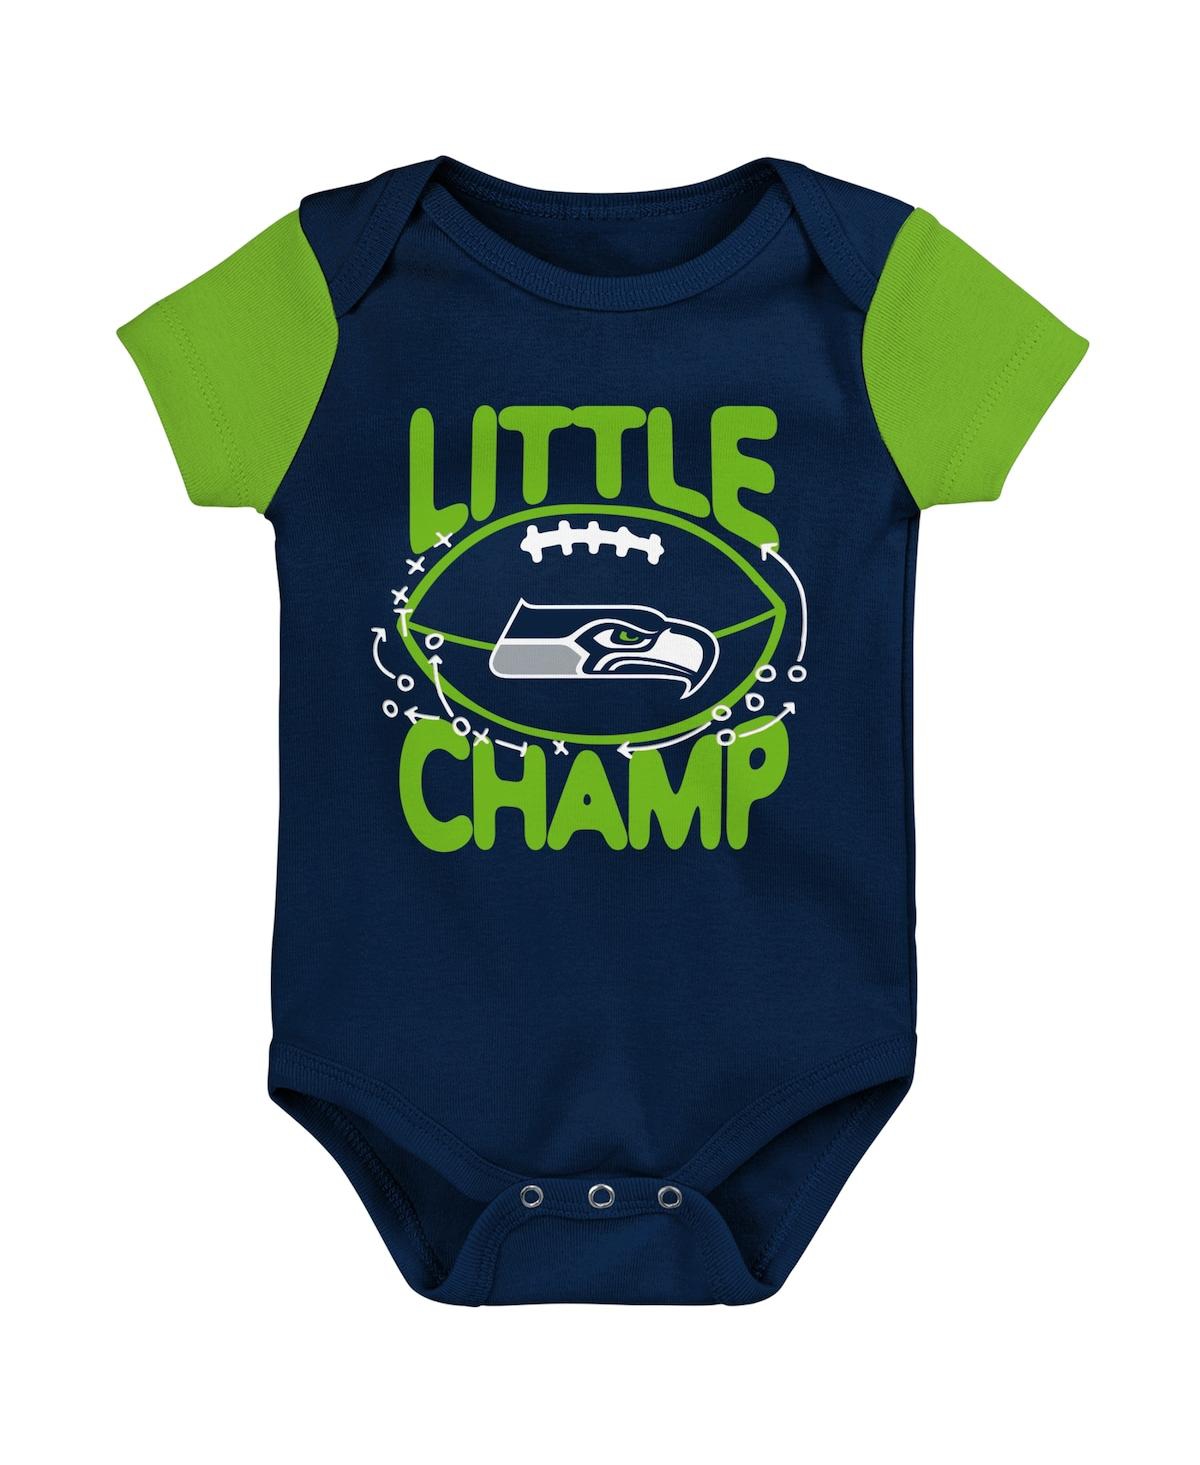 Shop Outerstuff Newborn And Infant Boys And Girls College Navy, Neon Green Seattle Seahawks Little Champ Three-piece In College Navy,neon